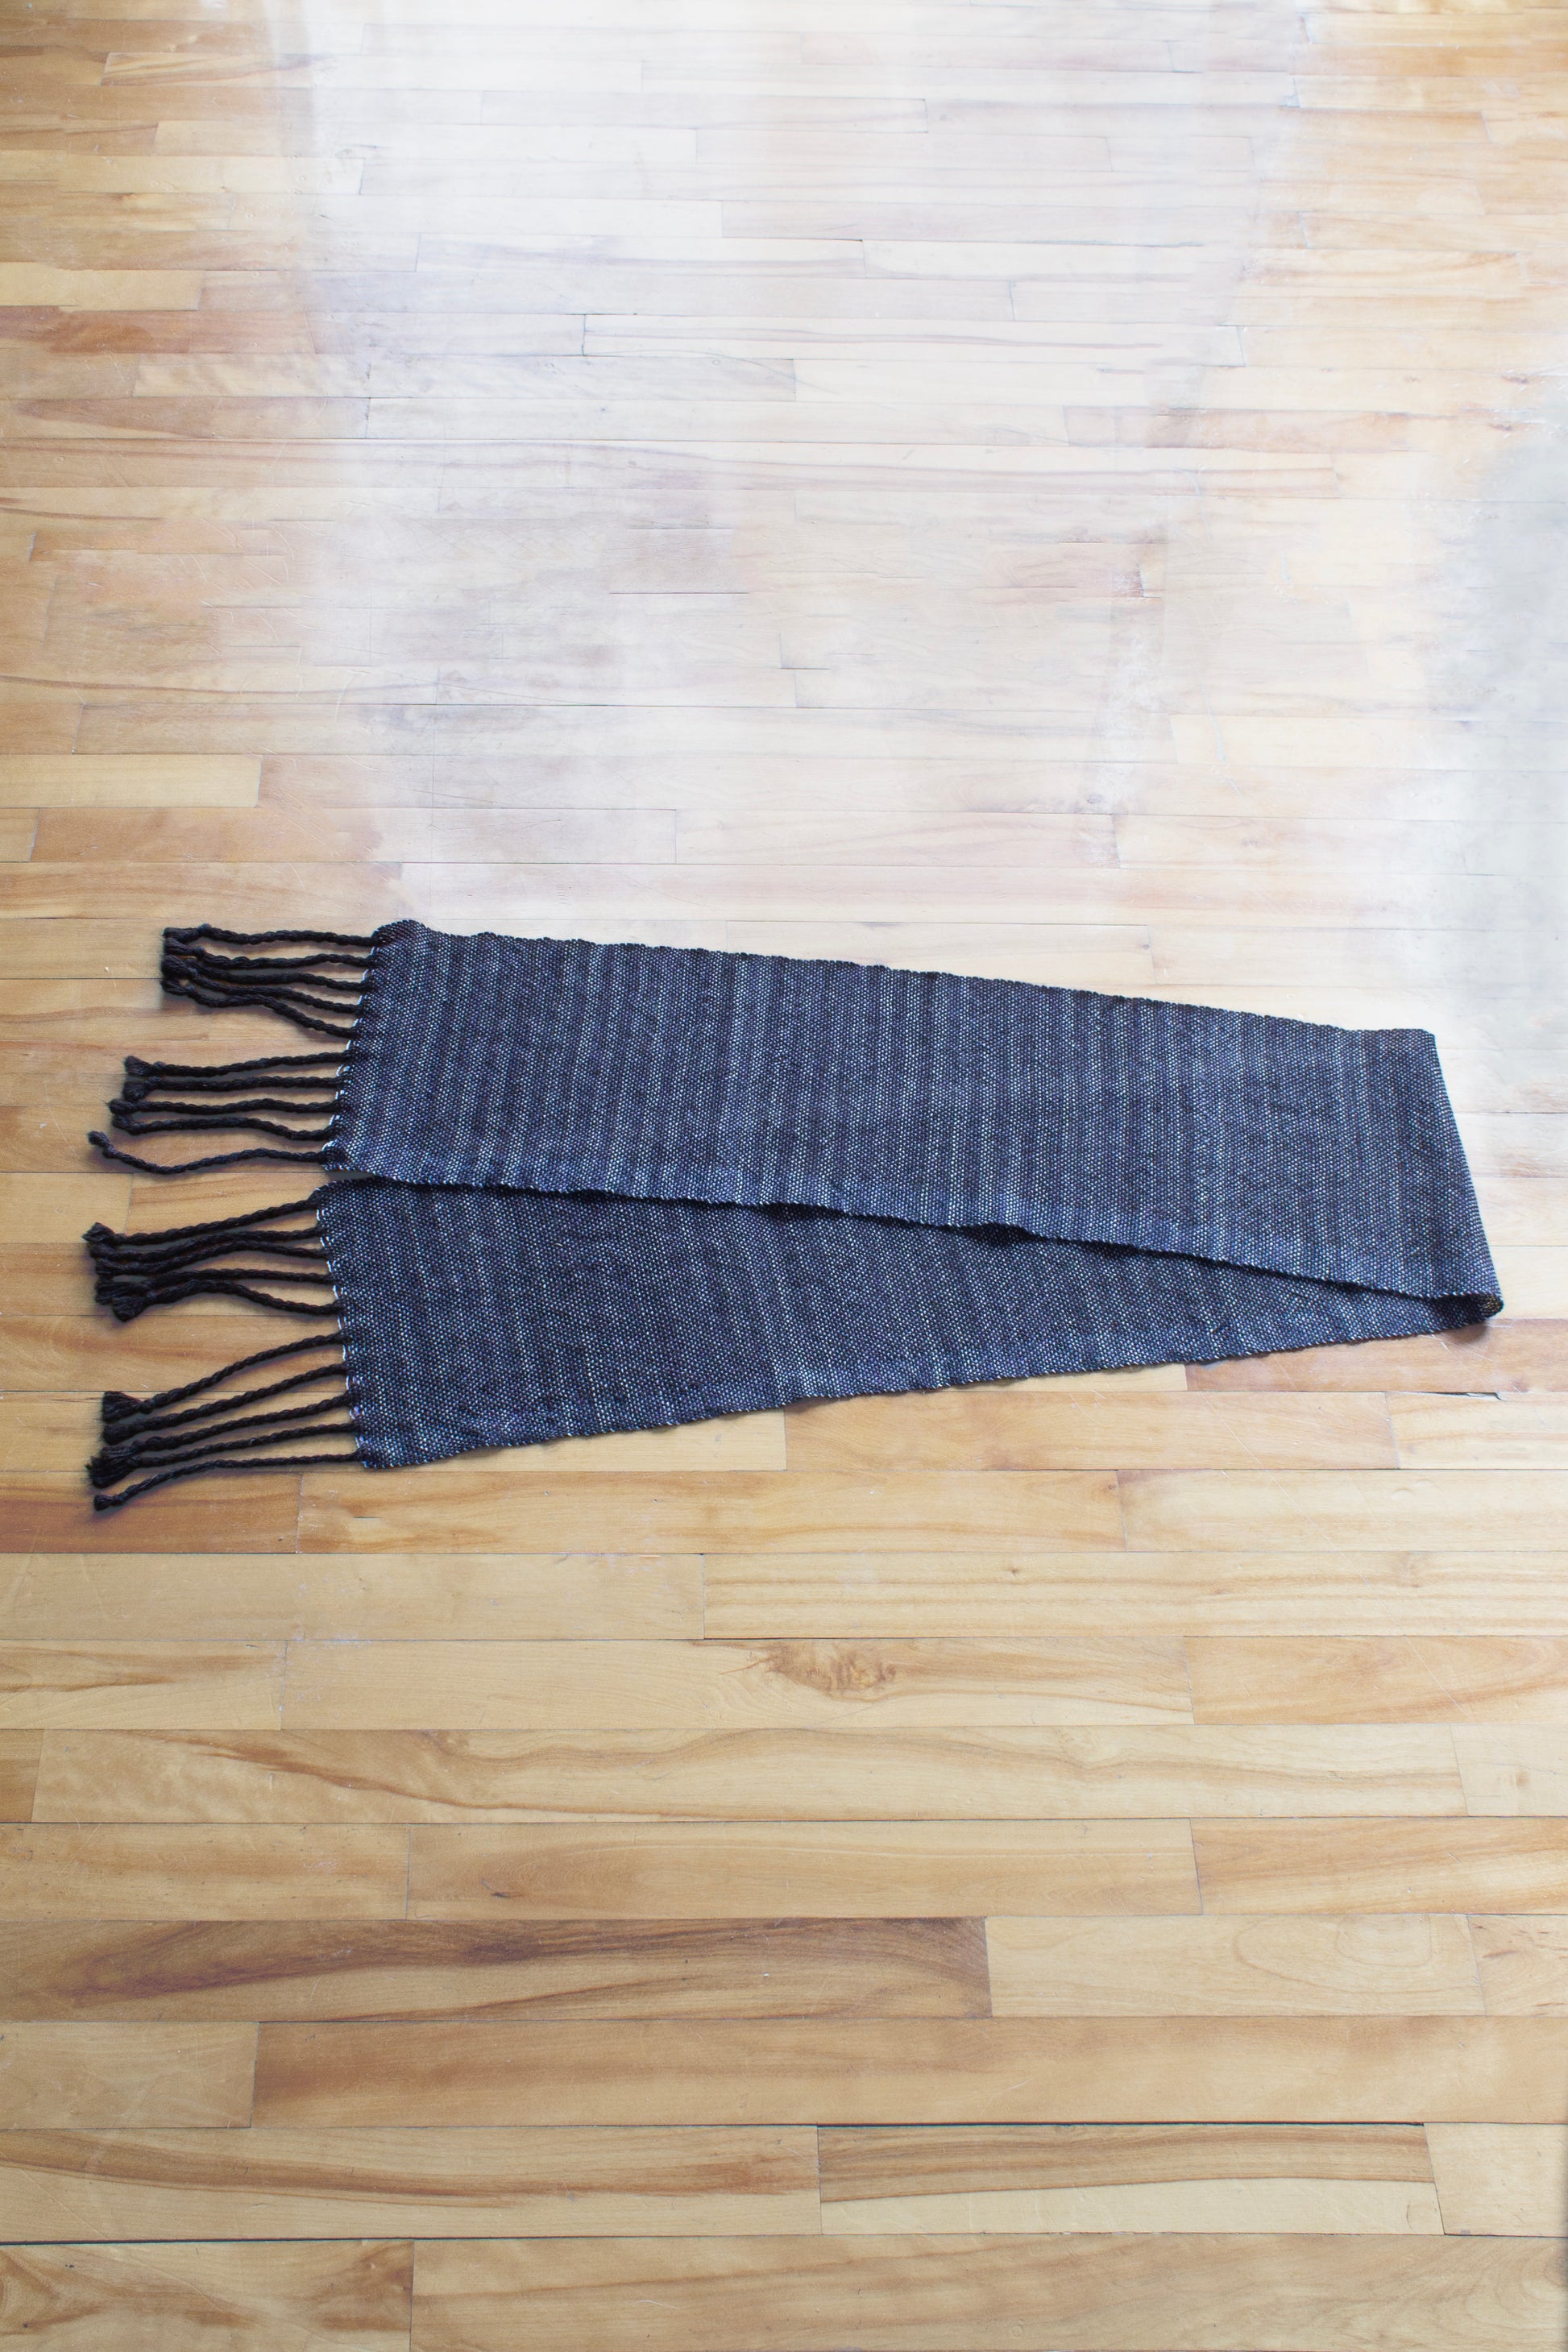 Alpaca scarf, dark purple, mixed colours, handmade, natural fibres, locally sourced, undyed black, twisted fringe, woven in Canada